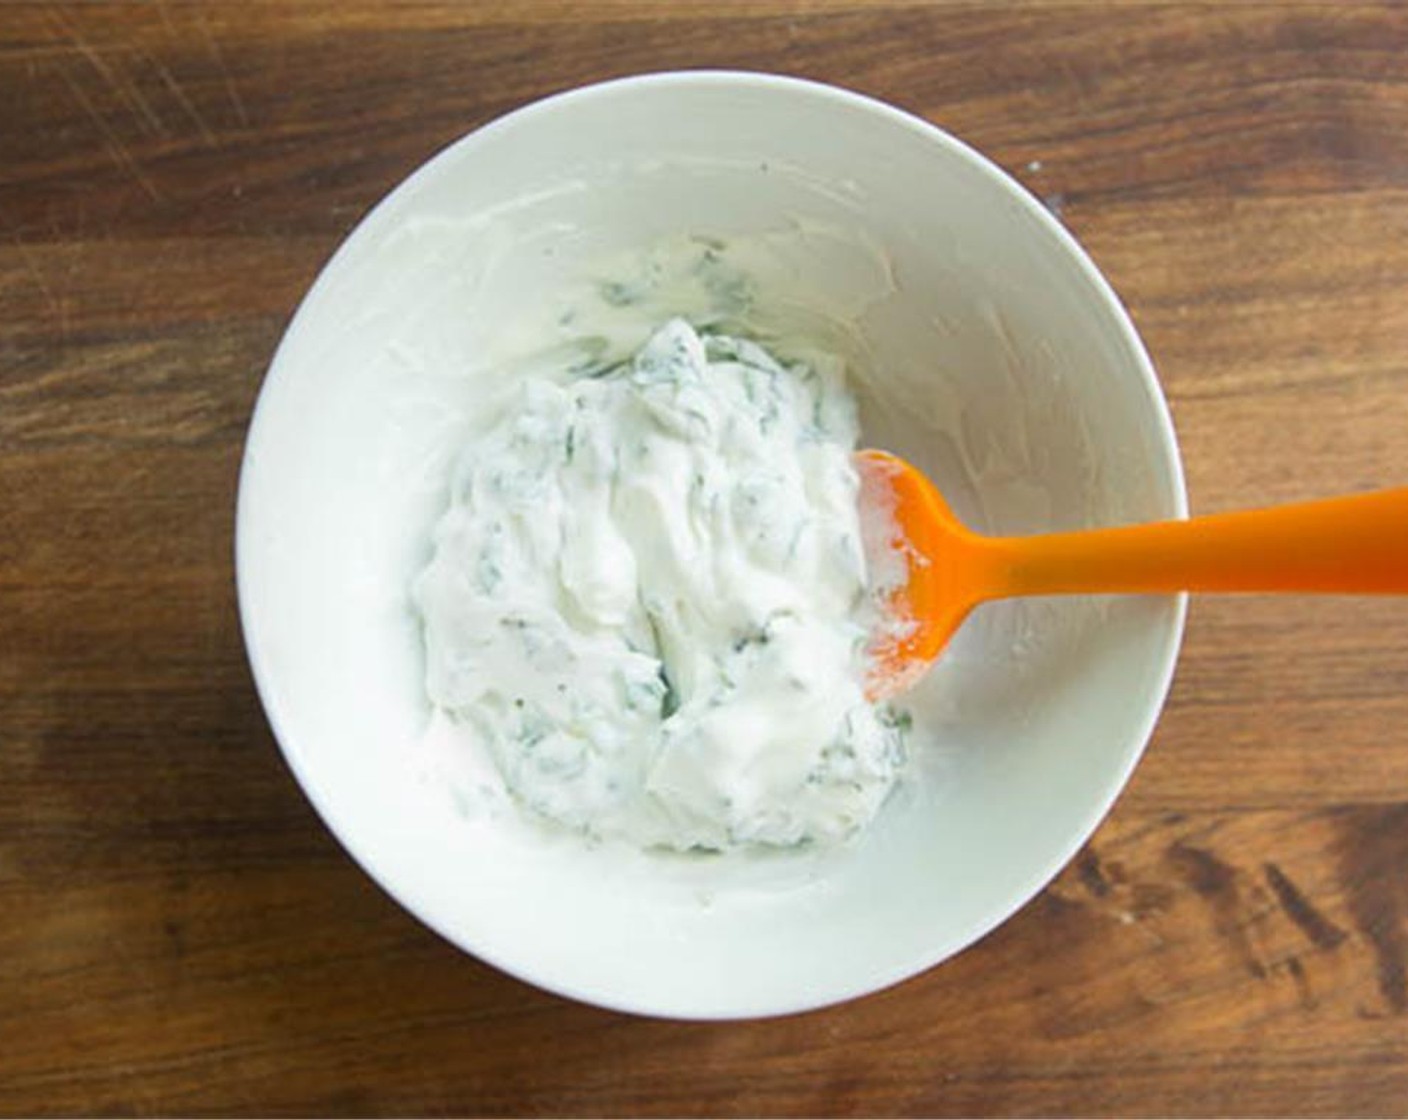 step 2 Combine the Sour Cream (3/4 cup), basil and garlic chives. Store in fridge until ready to serve.